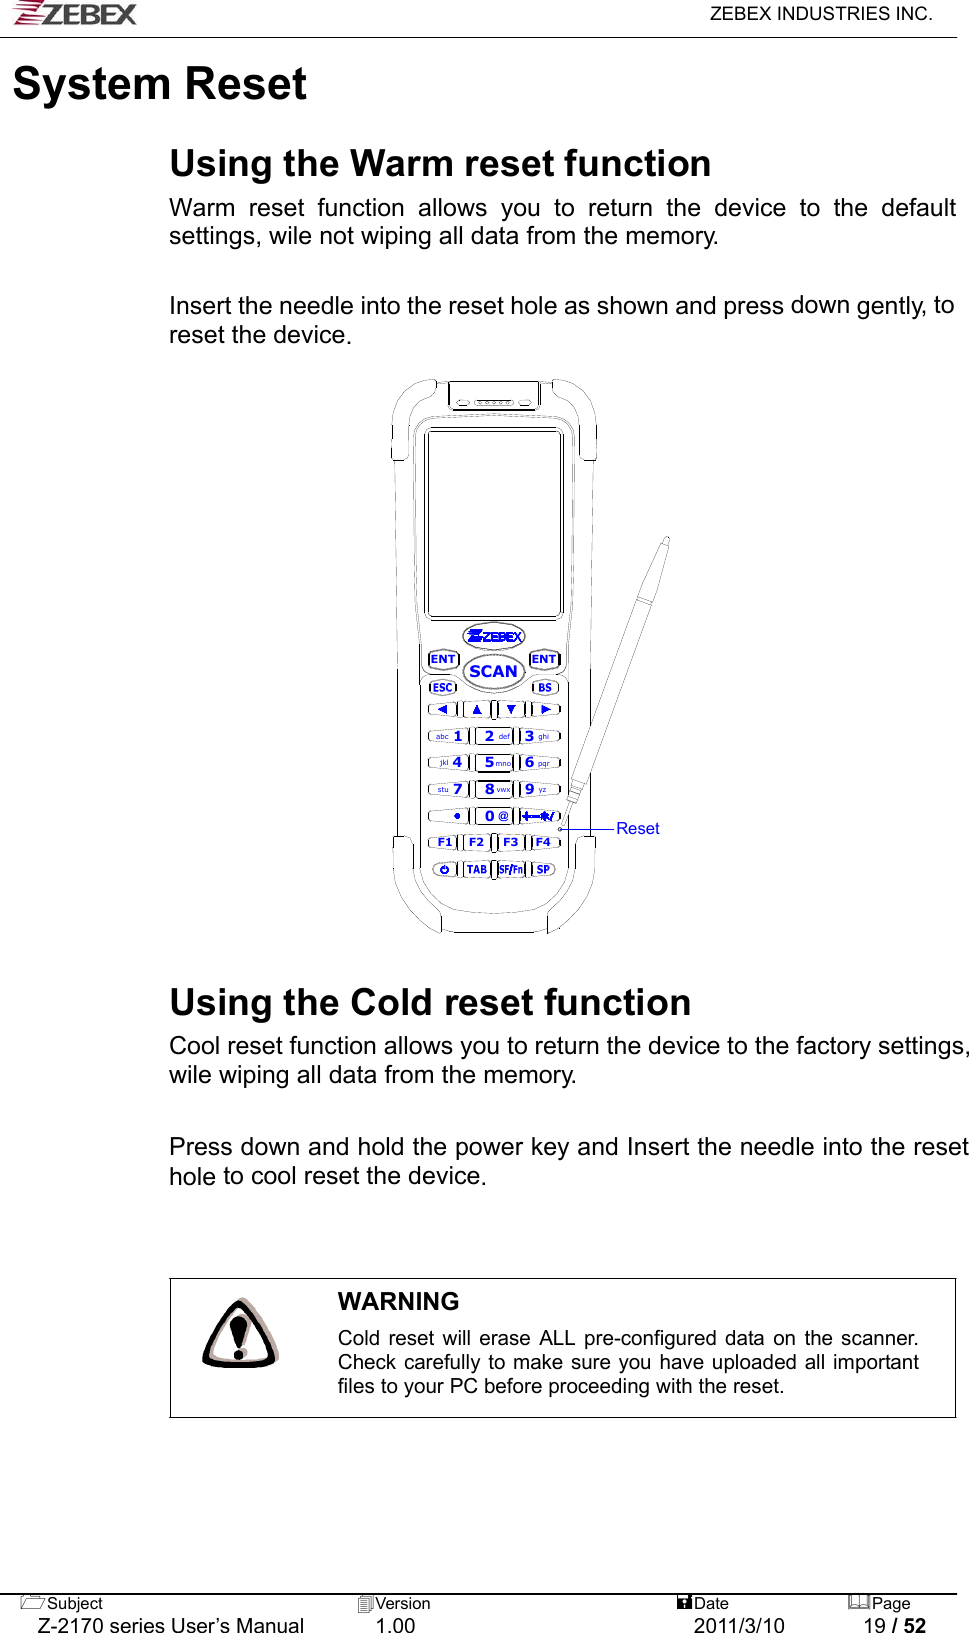   ZEBEX INDUSTRIES INC.  Subject  Version   DatePage   Z-2170 series User’s Manual  1.00  2011/3/10  19 / 52 System Reset   Using the Warm reset function Warm reset function allows you to return the device to the default settings, wile not wiping all data from the memory.   Insert the needle into the reset hole as shown and press down gently, to reset the device.   ENTENT0F1 F2 F4F32def 3ghiabc 1vwx8stu 79yzmno4jkl 5pqr6SCAN@Reset                            Using the Cold reset function Cool reset function allows you to return the device to the factory settings, wile wiping all data from the memory.  Press down and hold the power key and Insert the needle into the reset hole to cool reset the device.    WARNING Cold reset will erase ALL pre-configured data on the scanner. Check carefully to make sure you have uploaded all important files to your PC before proceeding with the reset.  